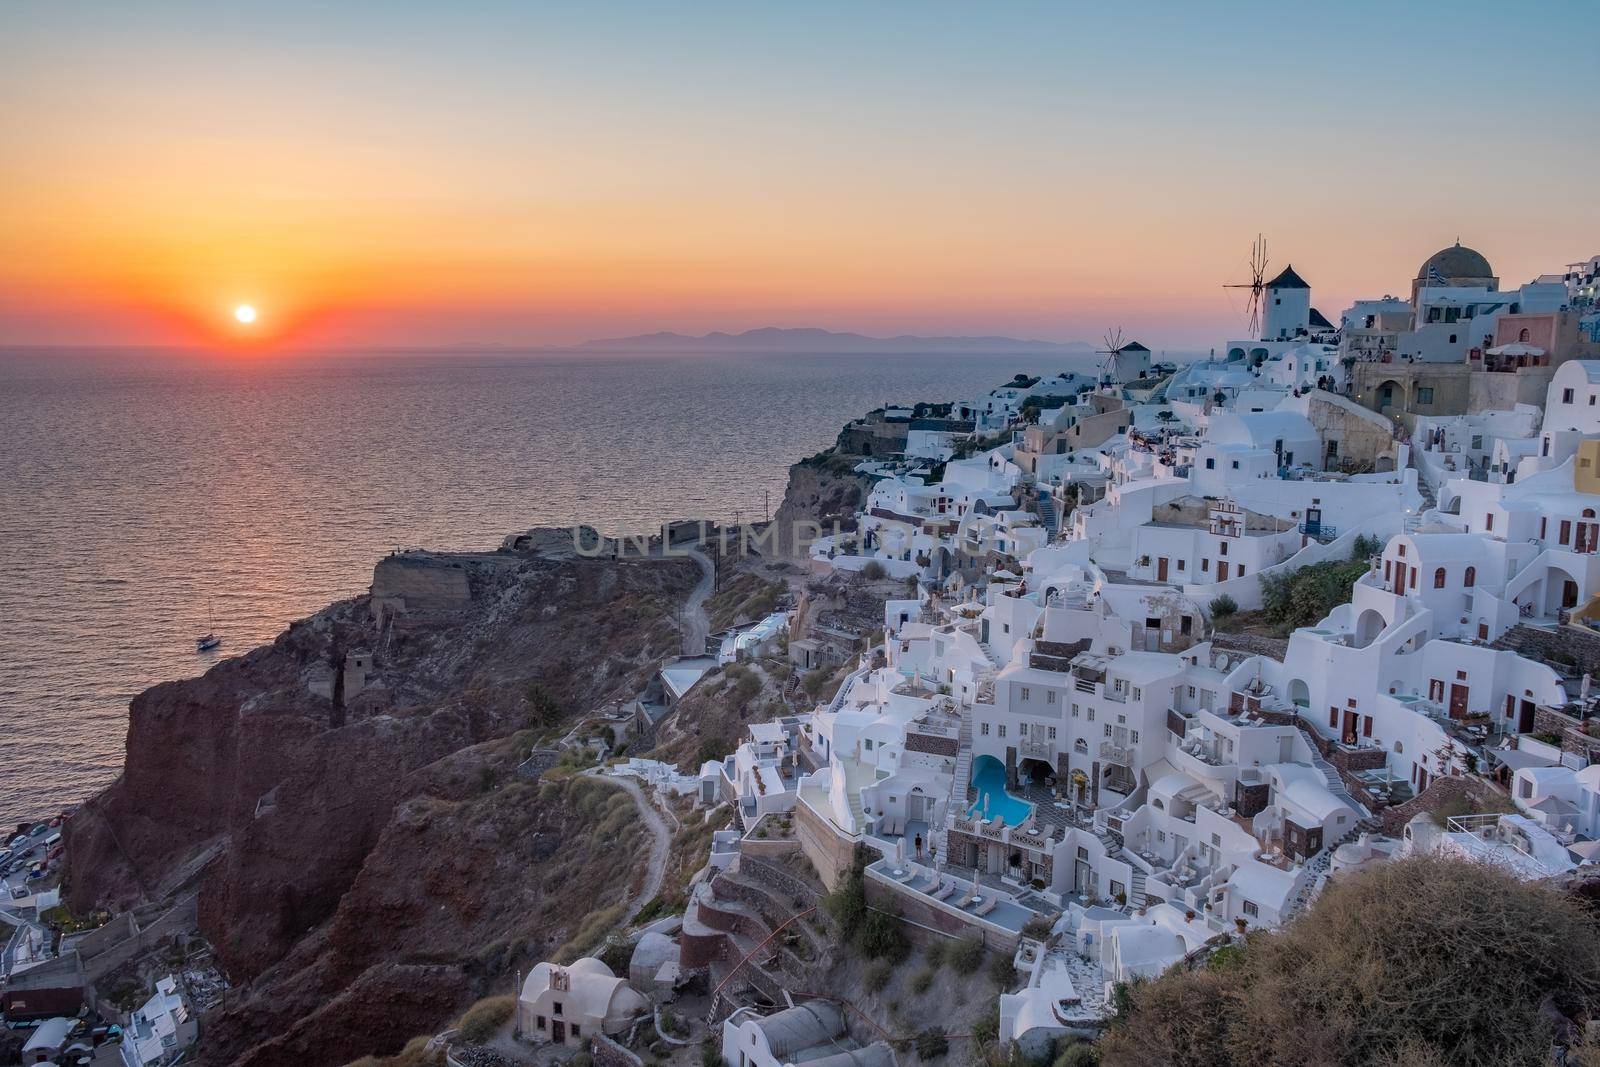 Sunset at the Island Of Santorini Greece, beautiful whitewashed village Oia with church and windmill during sunset by fokkebok